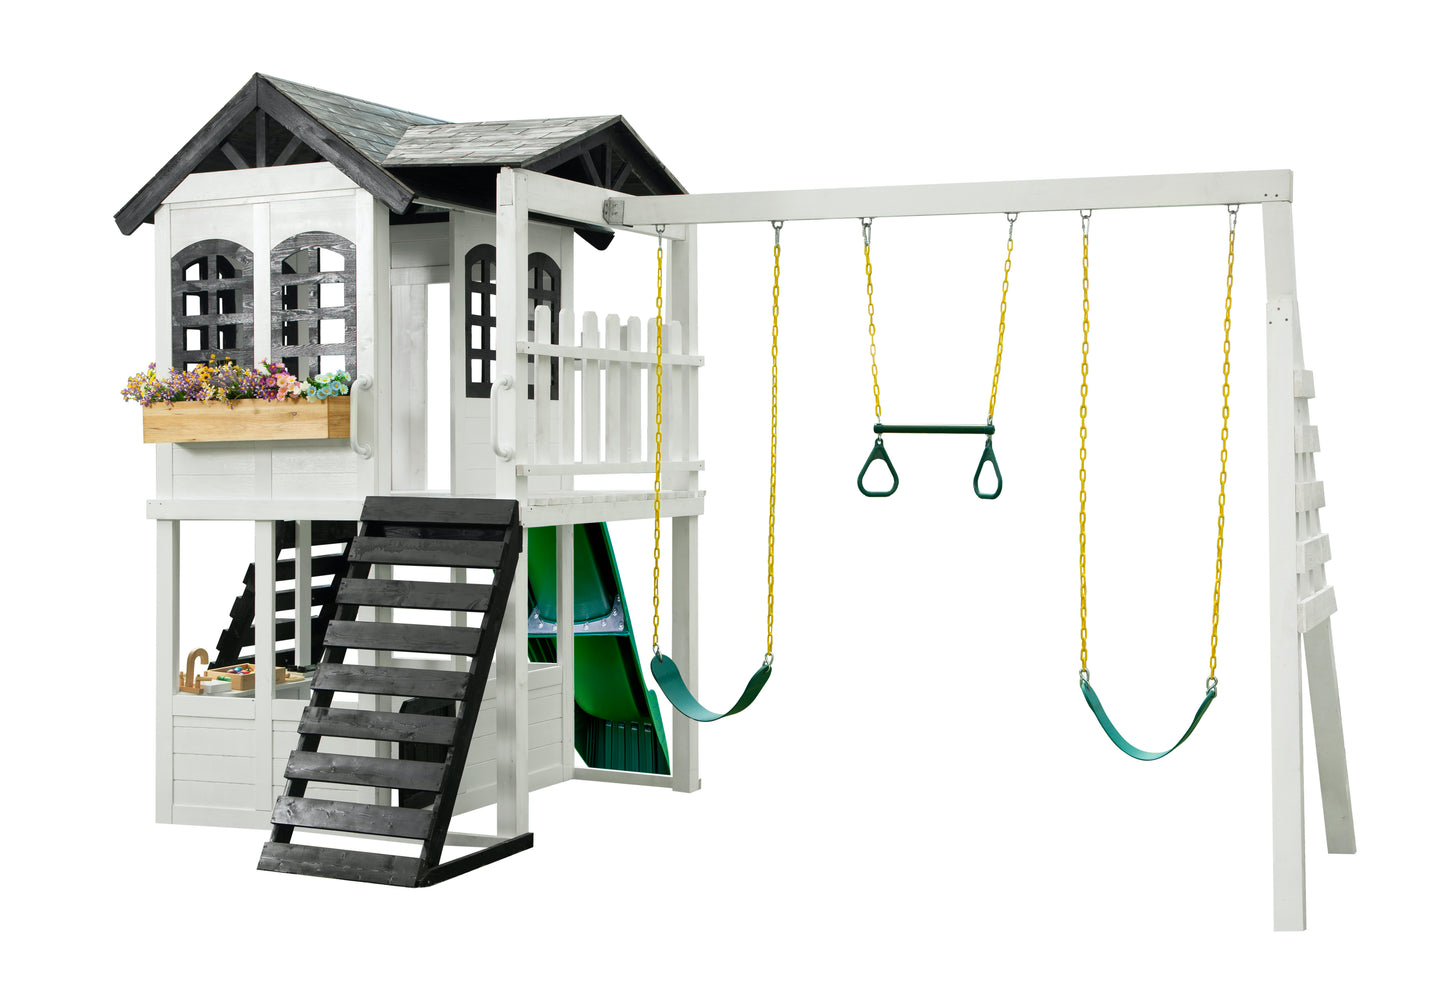 Reign Two Story Playhouse | 2MamaBees